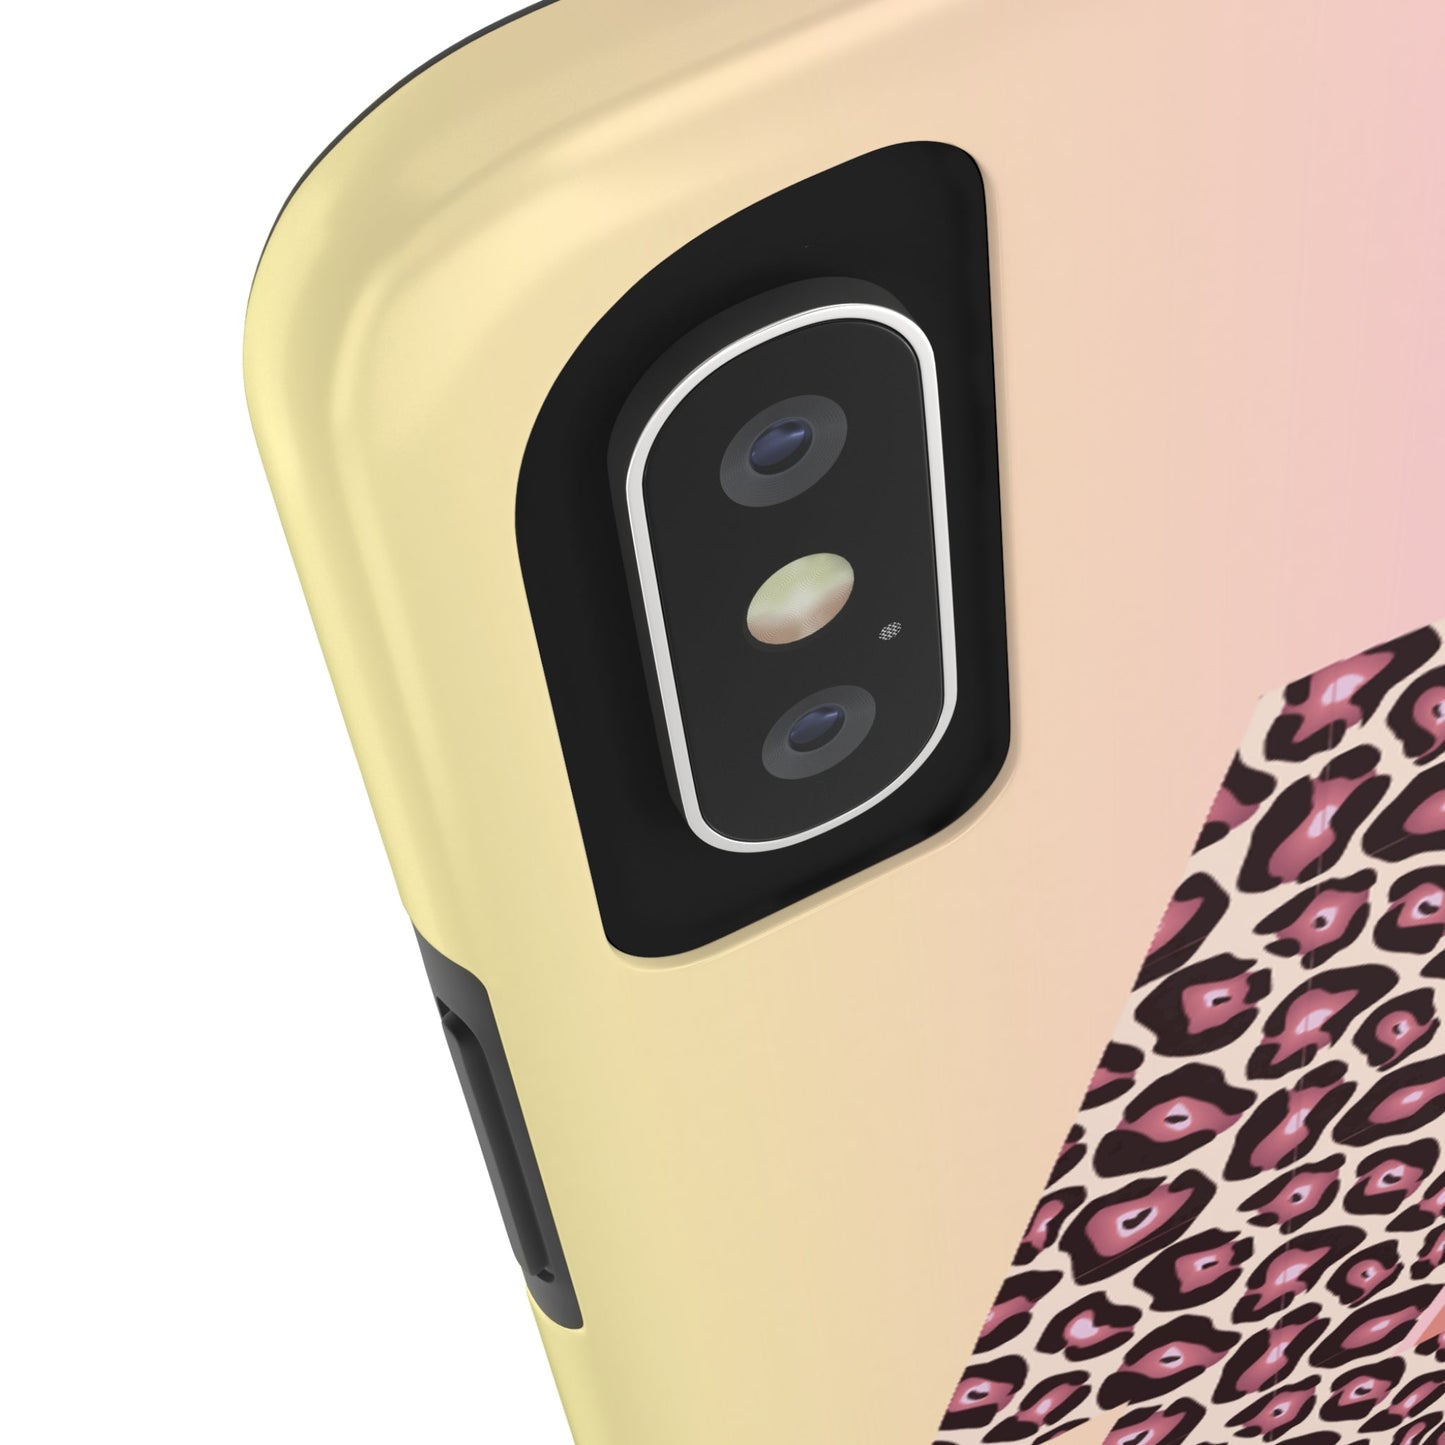 Stylish Pink Leopard Lightning Bolt Cell Phone Cover: Fashion Meets Protection - Eddy and Rita